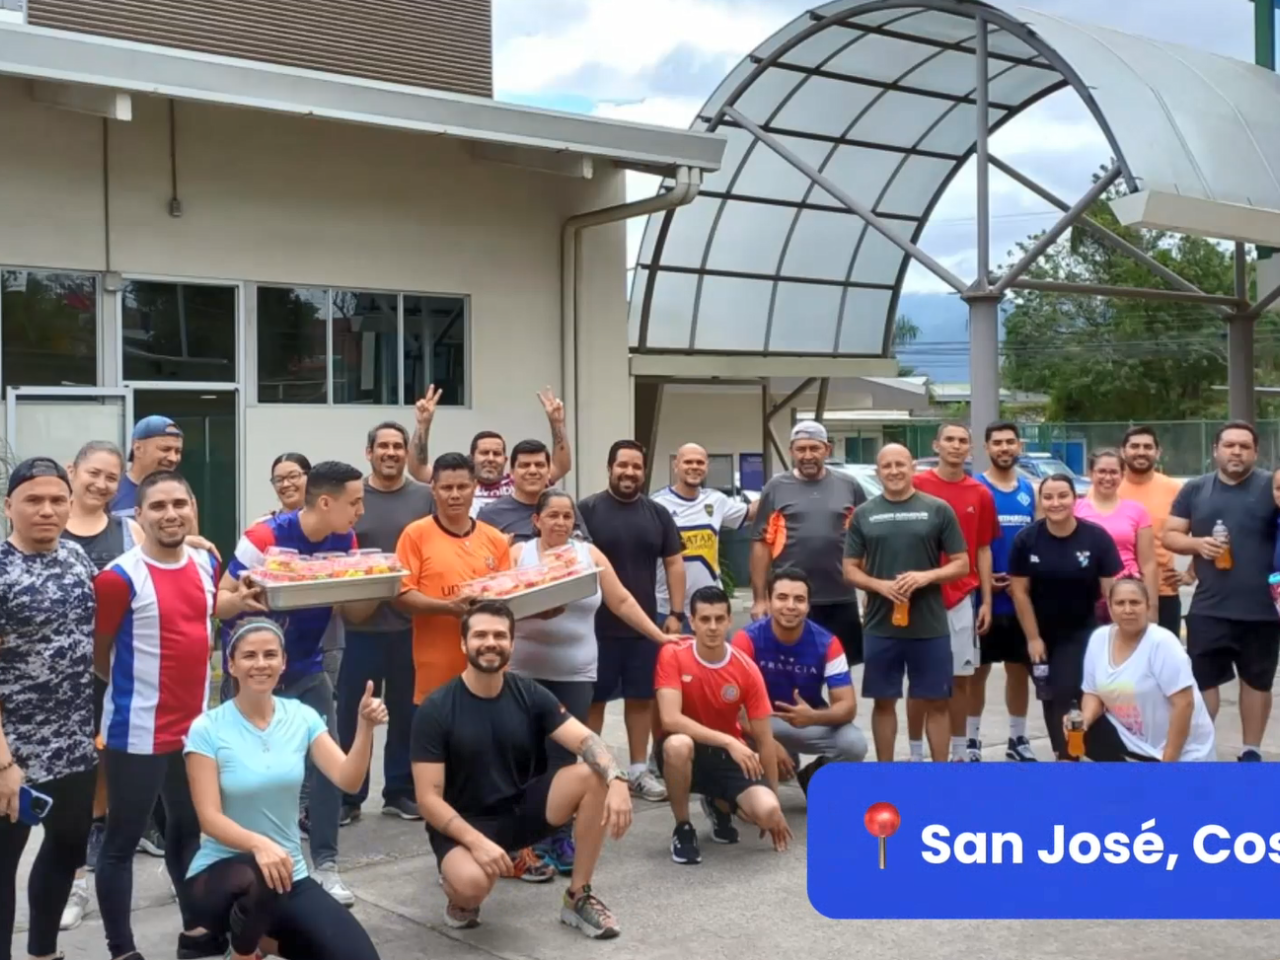 Group of employees posed outside. "San Jose, Costa Rica" in the corner.